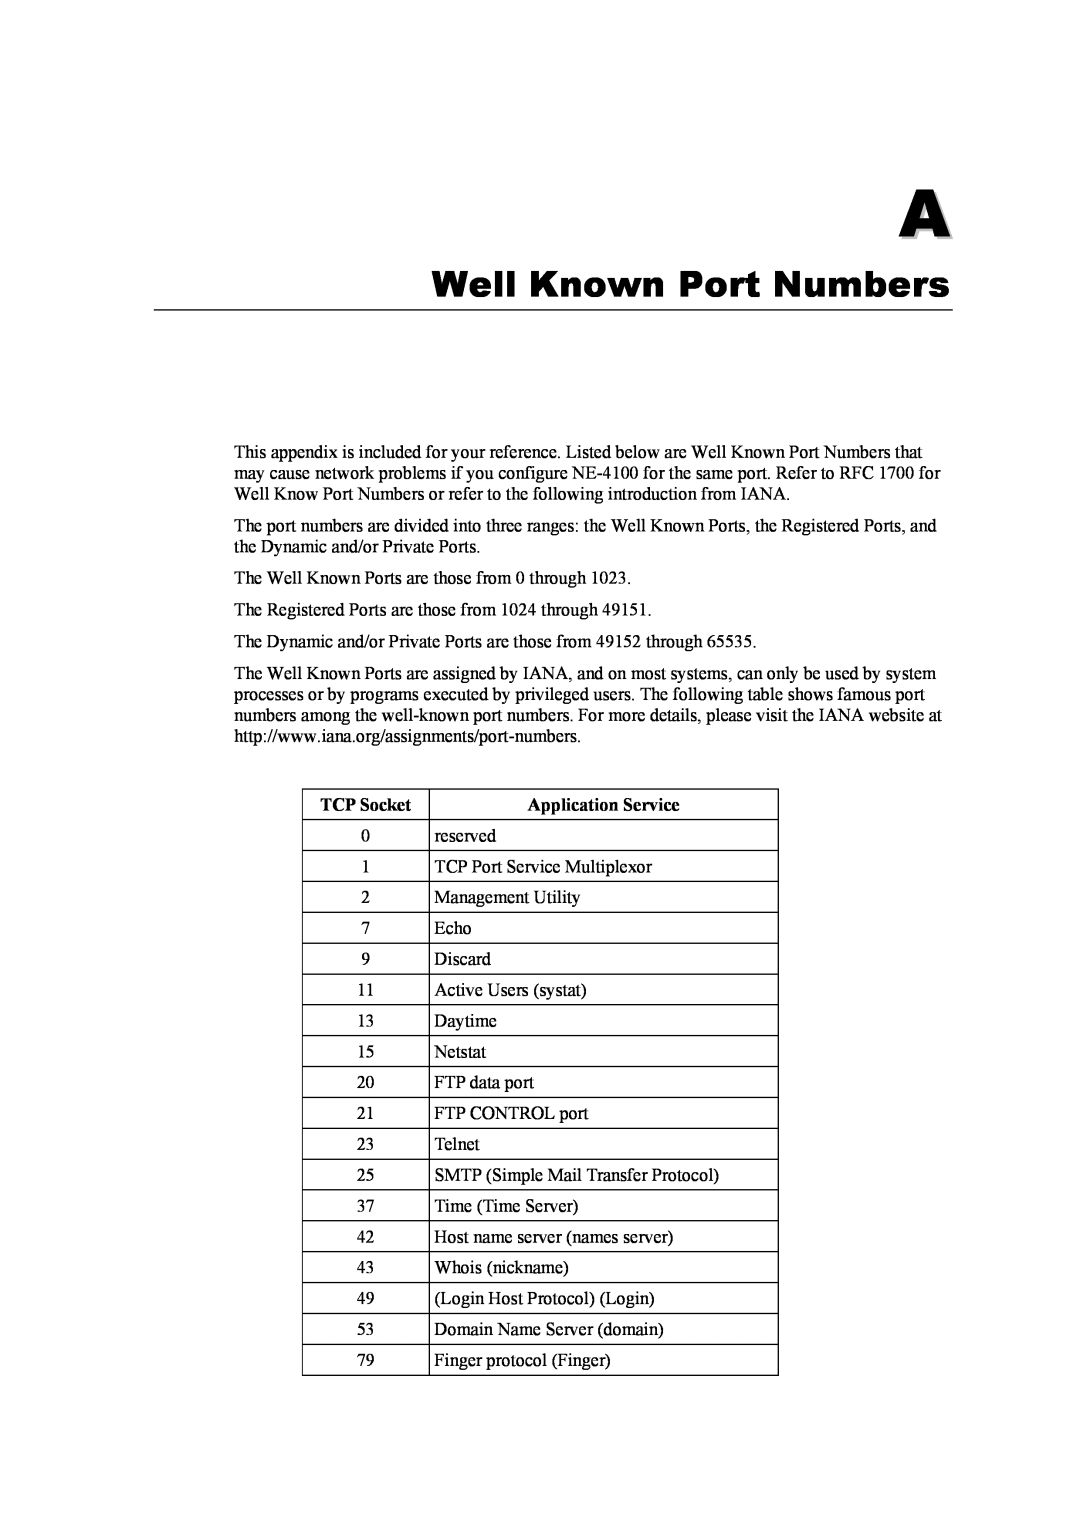 Moxa Technologies NE-4100 user manual Well Known Port Numbers 